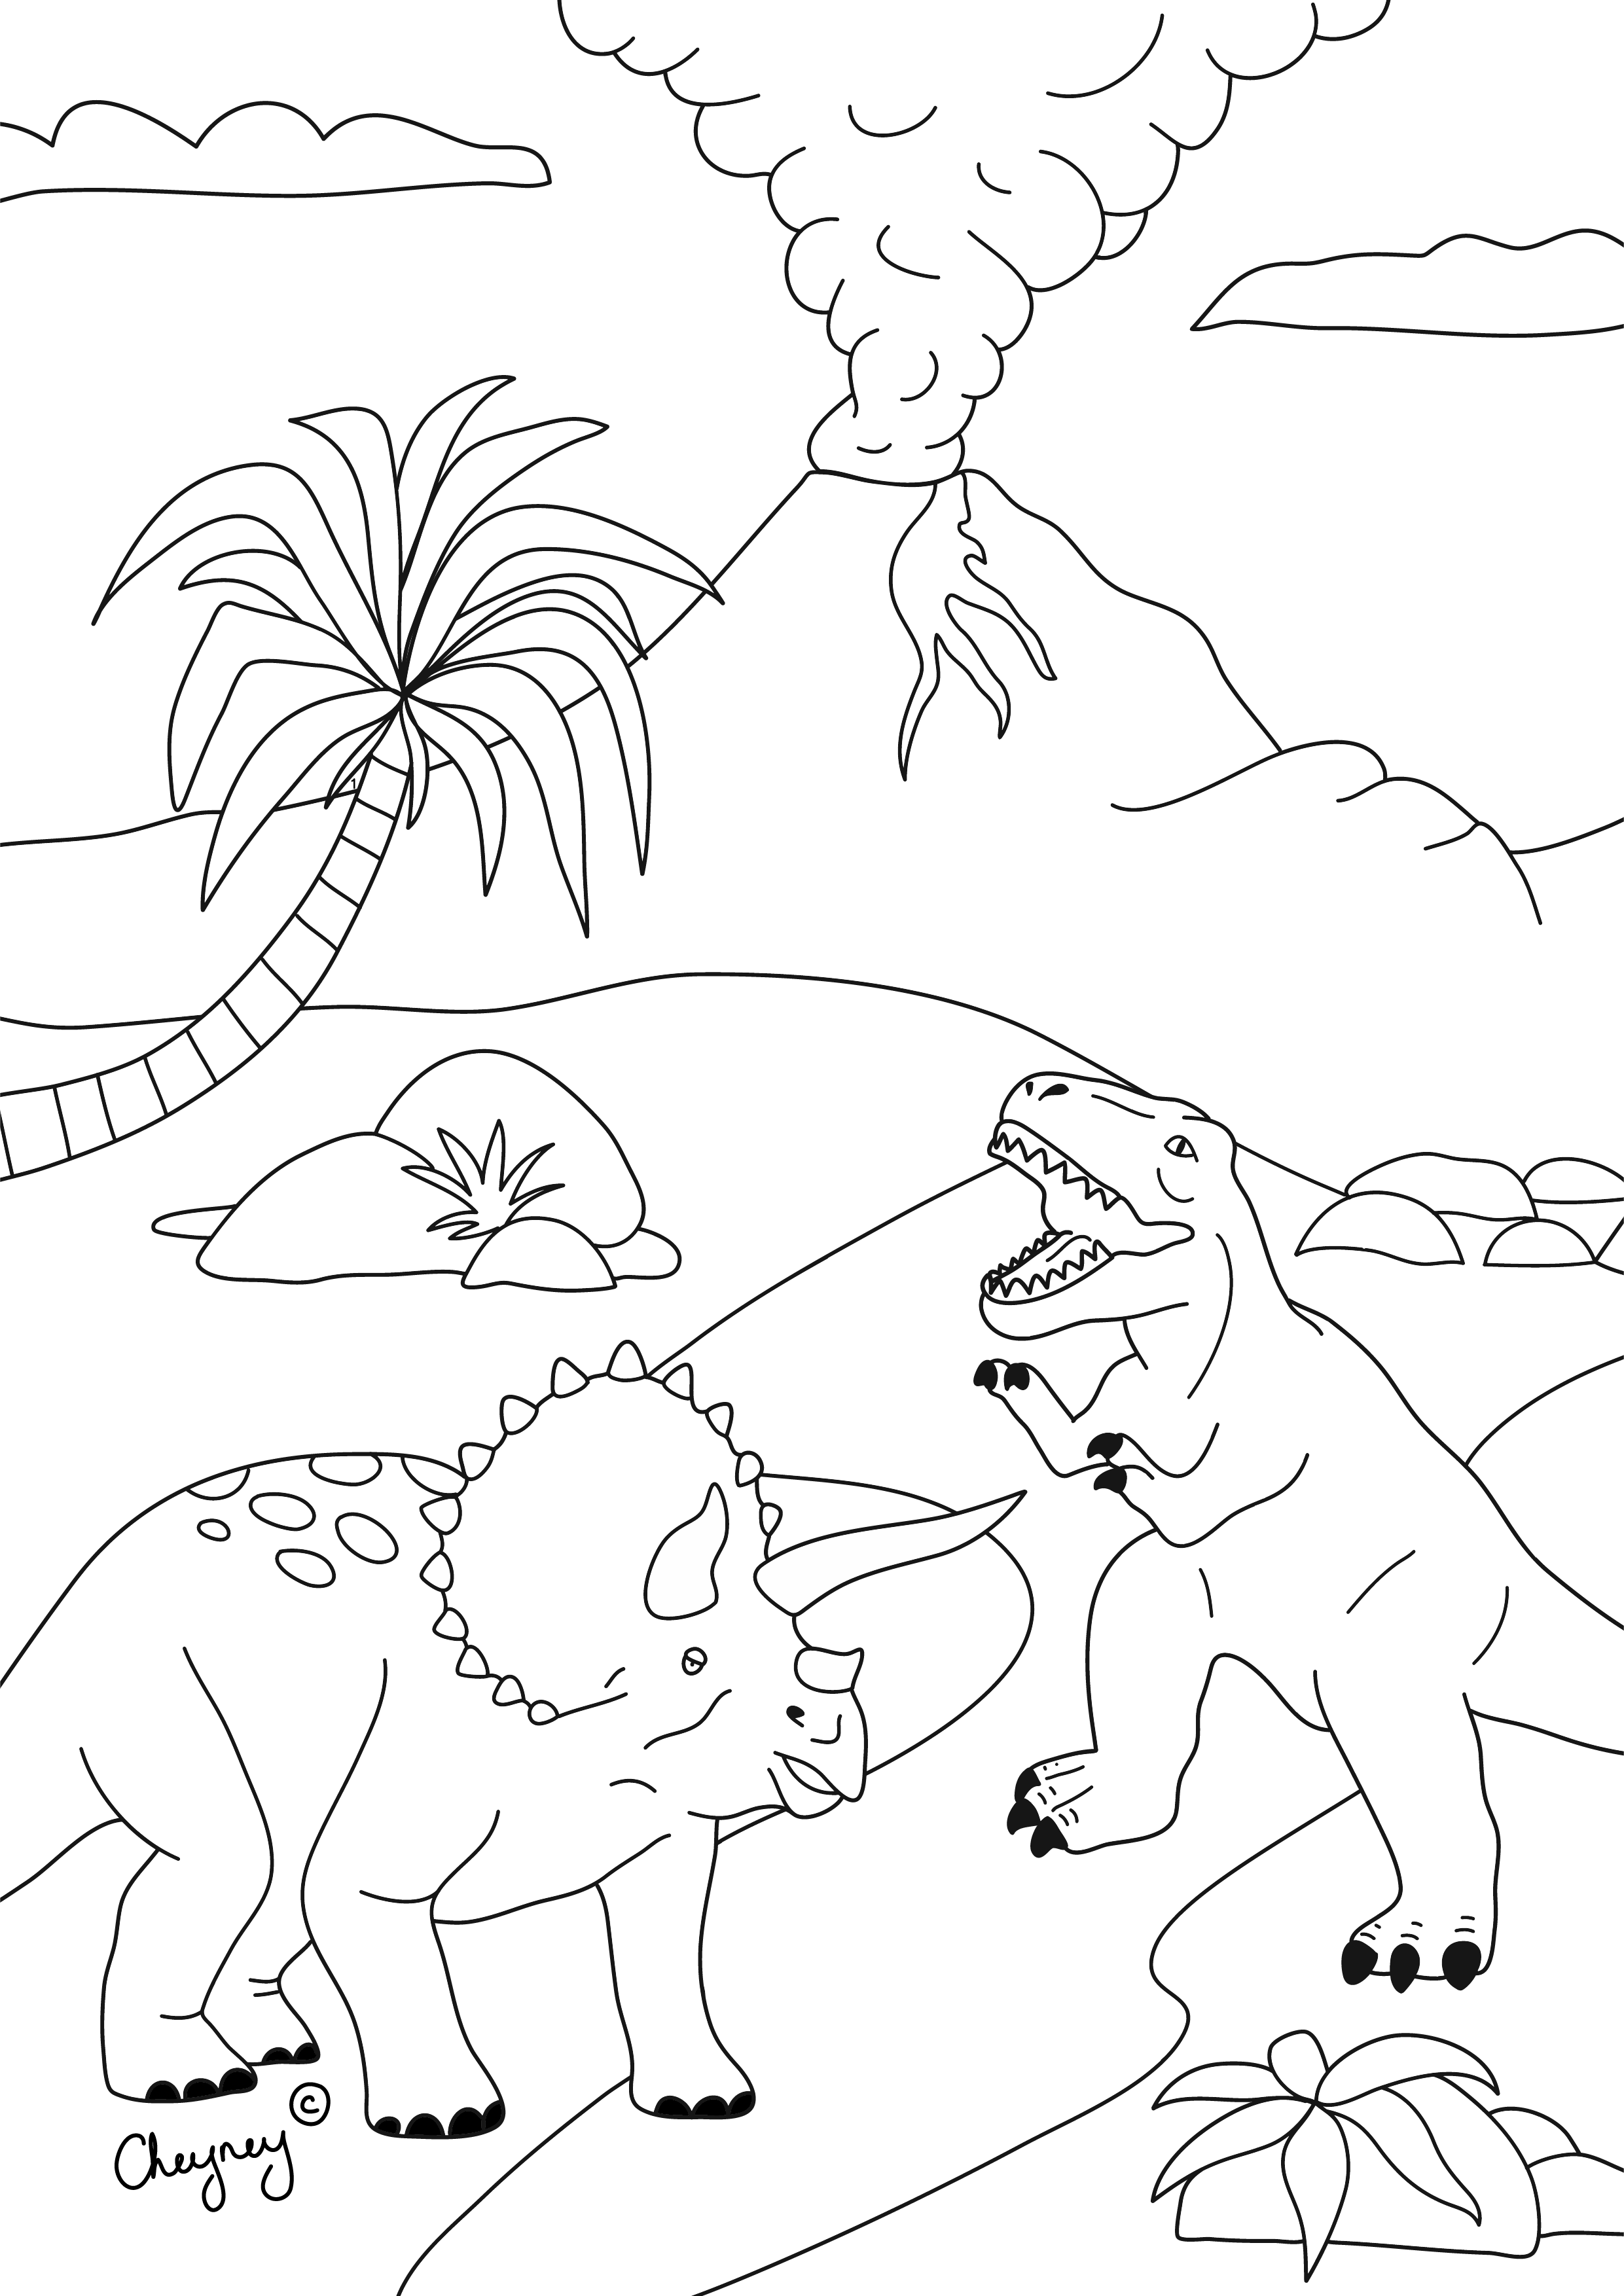 dinosaur colour by numbers or not creative colouring in